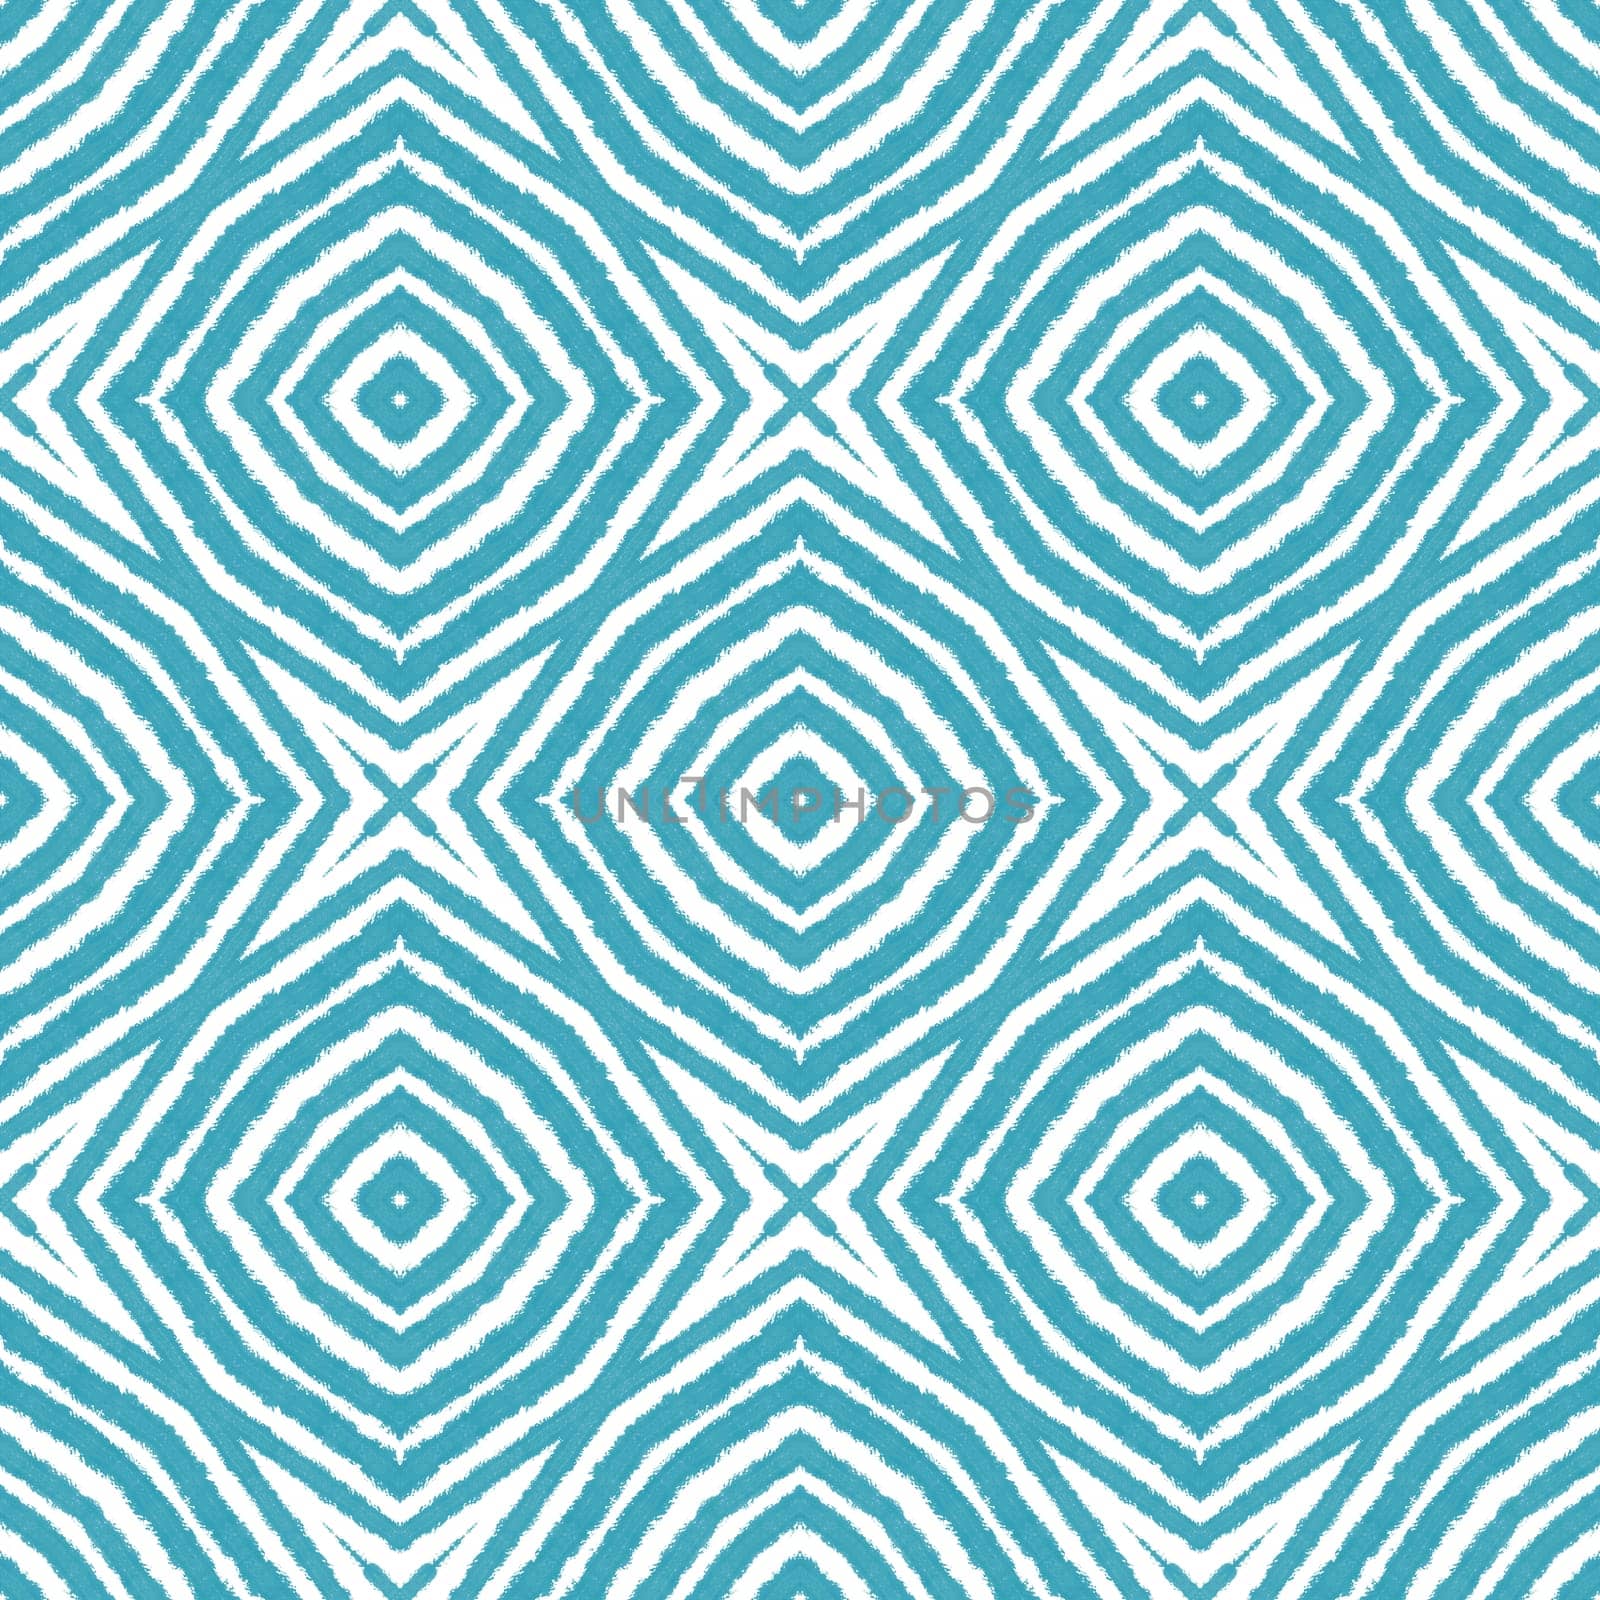 Ethnic hand painted pattern. Turquoise symmetrical kaleidoscope background. Summer dress ethnic hand painted tile. Textile ready valuable print, swimwear fabric, wallpaper, wrapping.